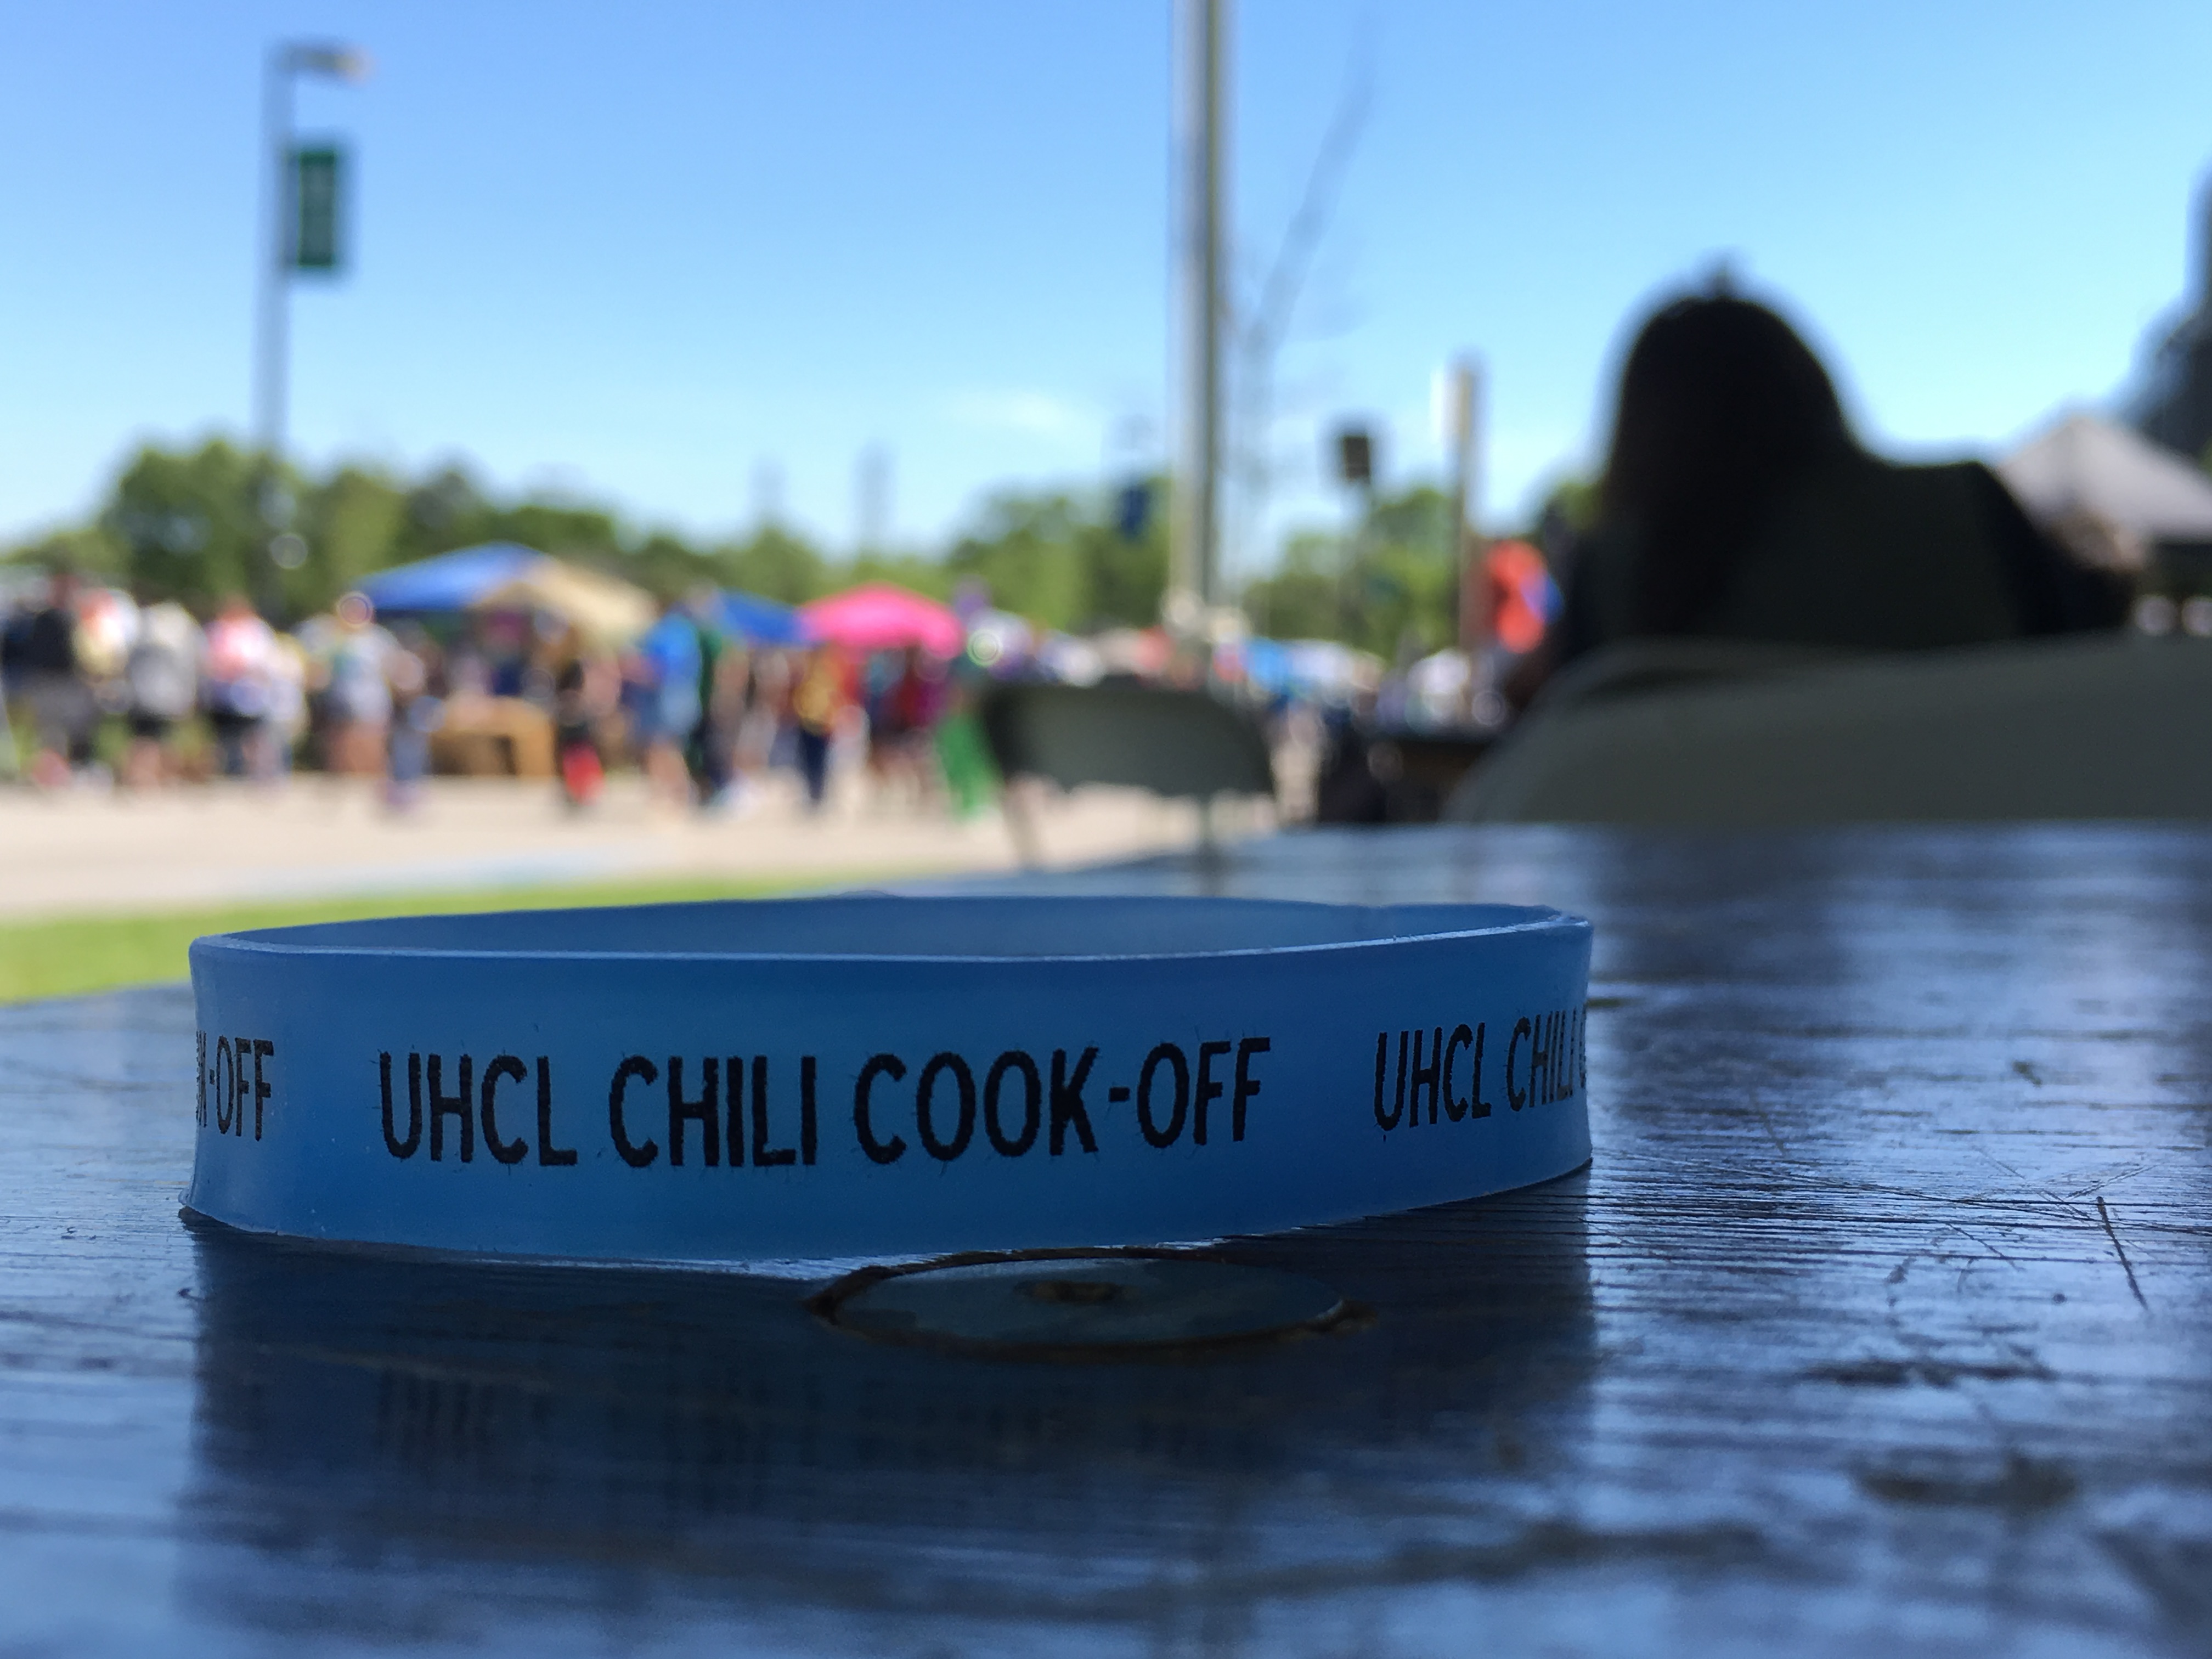 UHCL Chili Cook-Off Wristband. Photo by The Signal reporter Nathan Jeter.